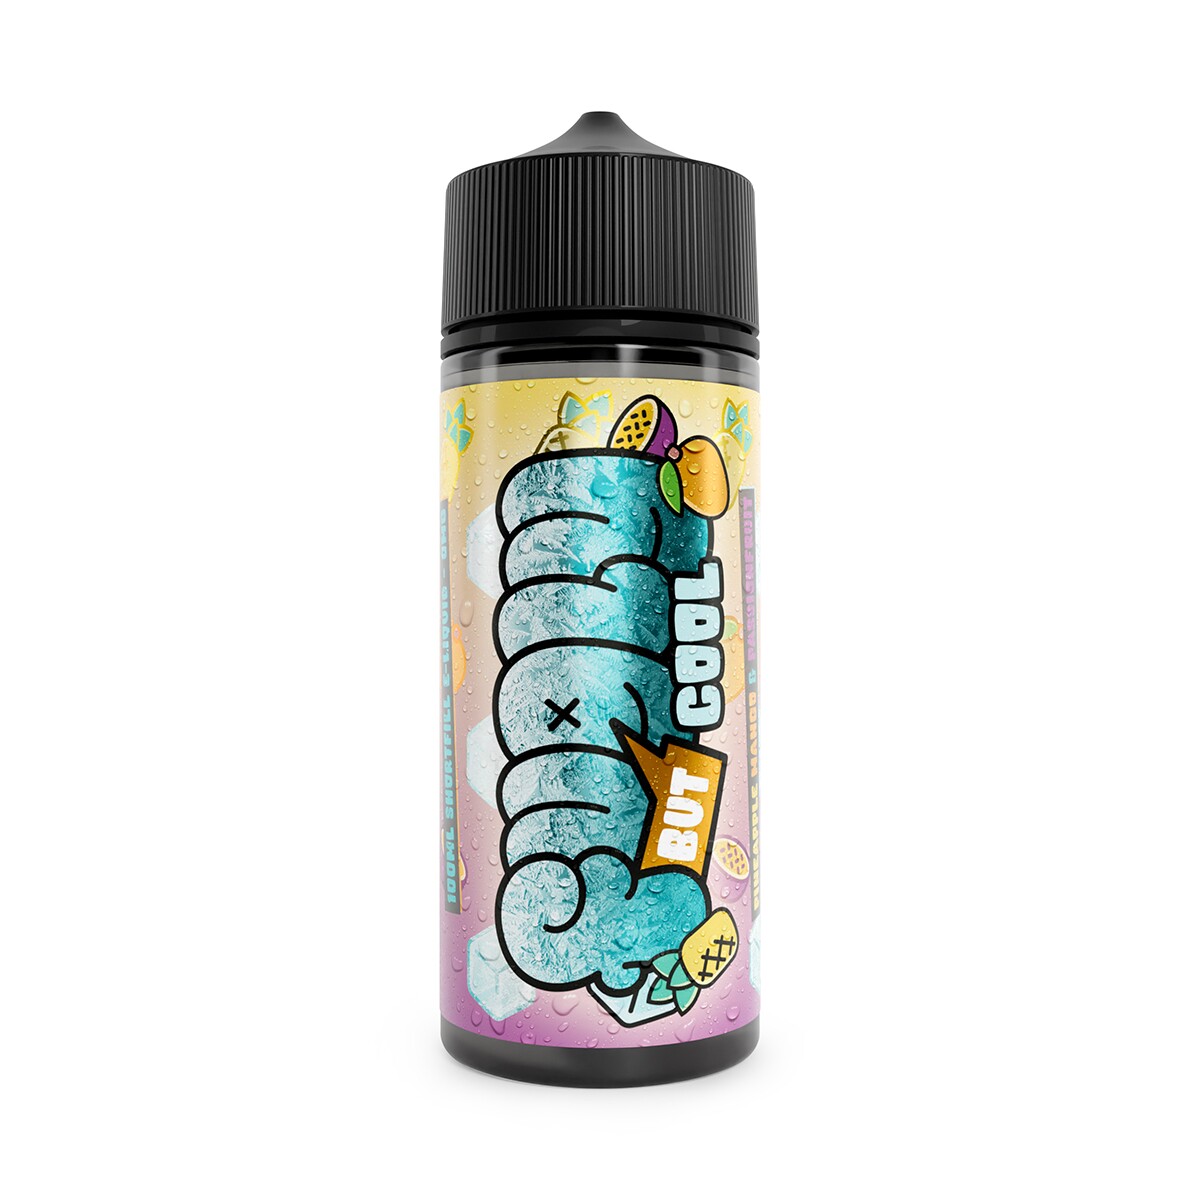 Get Your Fugly But Cool Pineapple, Mango & Passionfruit, A Marvellous Medley Of Flavours Over At Dispergo Vaping Uk